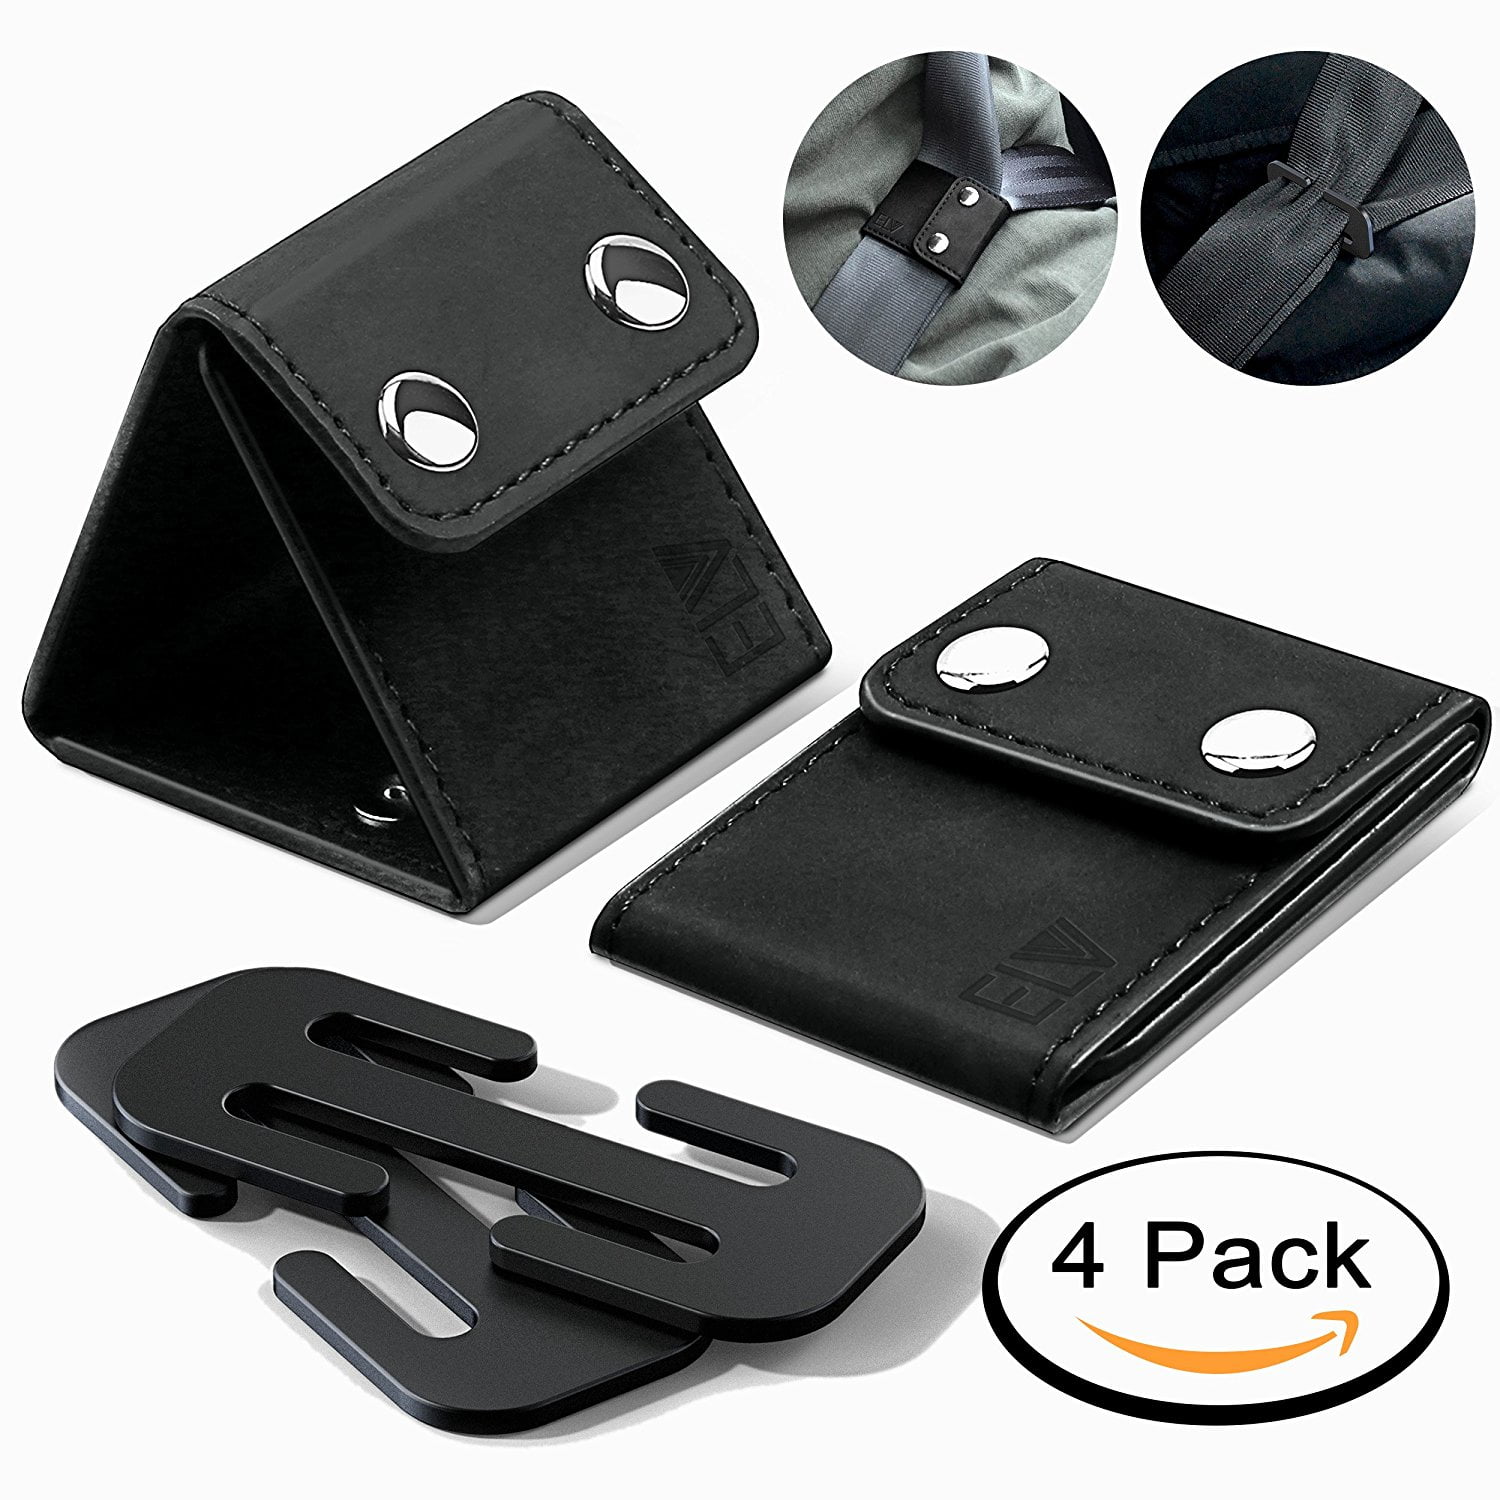 2pcs Seatbelt Adjuster Comfort Car Shoulder Neck Strap Positioner Clips Protects from Cutting Your Neck or Rubbing Your Chest Black 